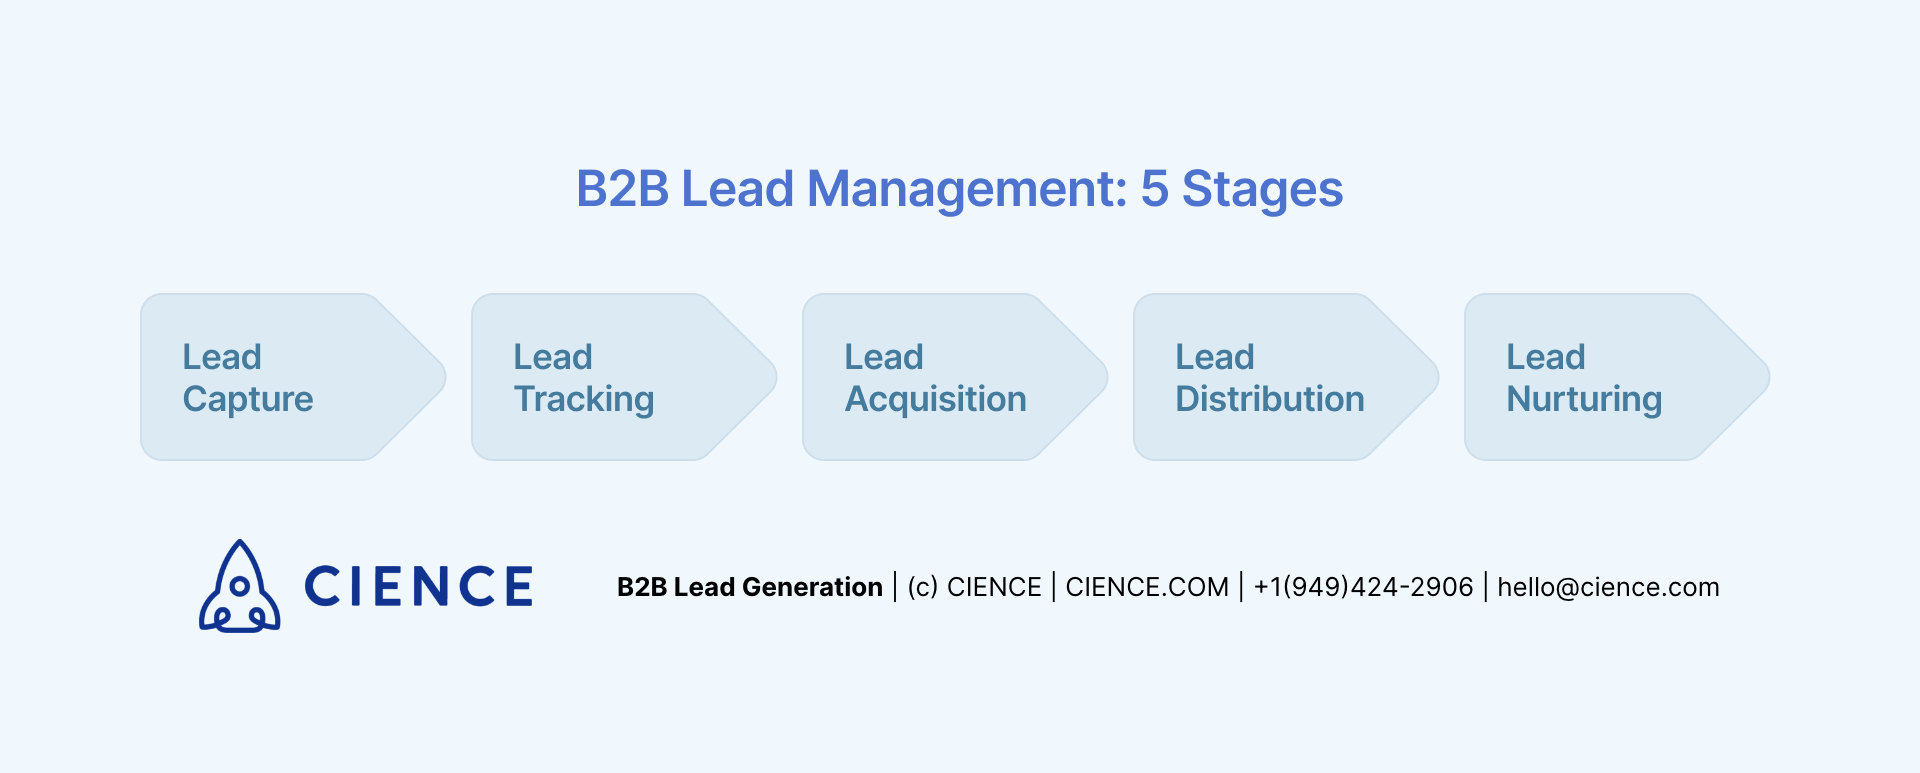 5 Stages of B2B Lead Management